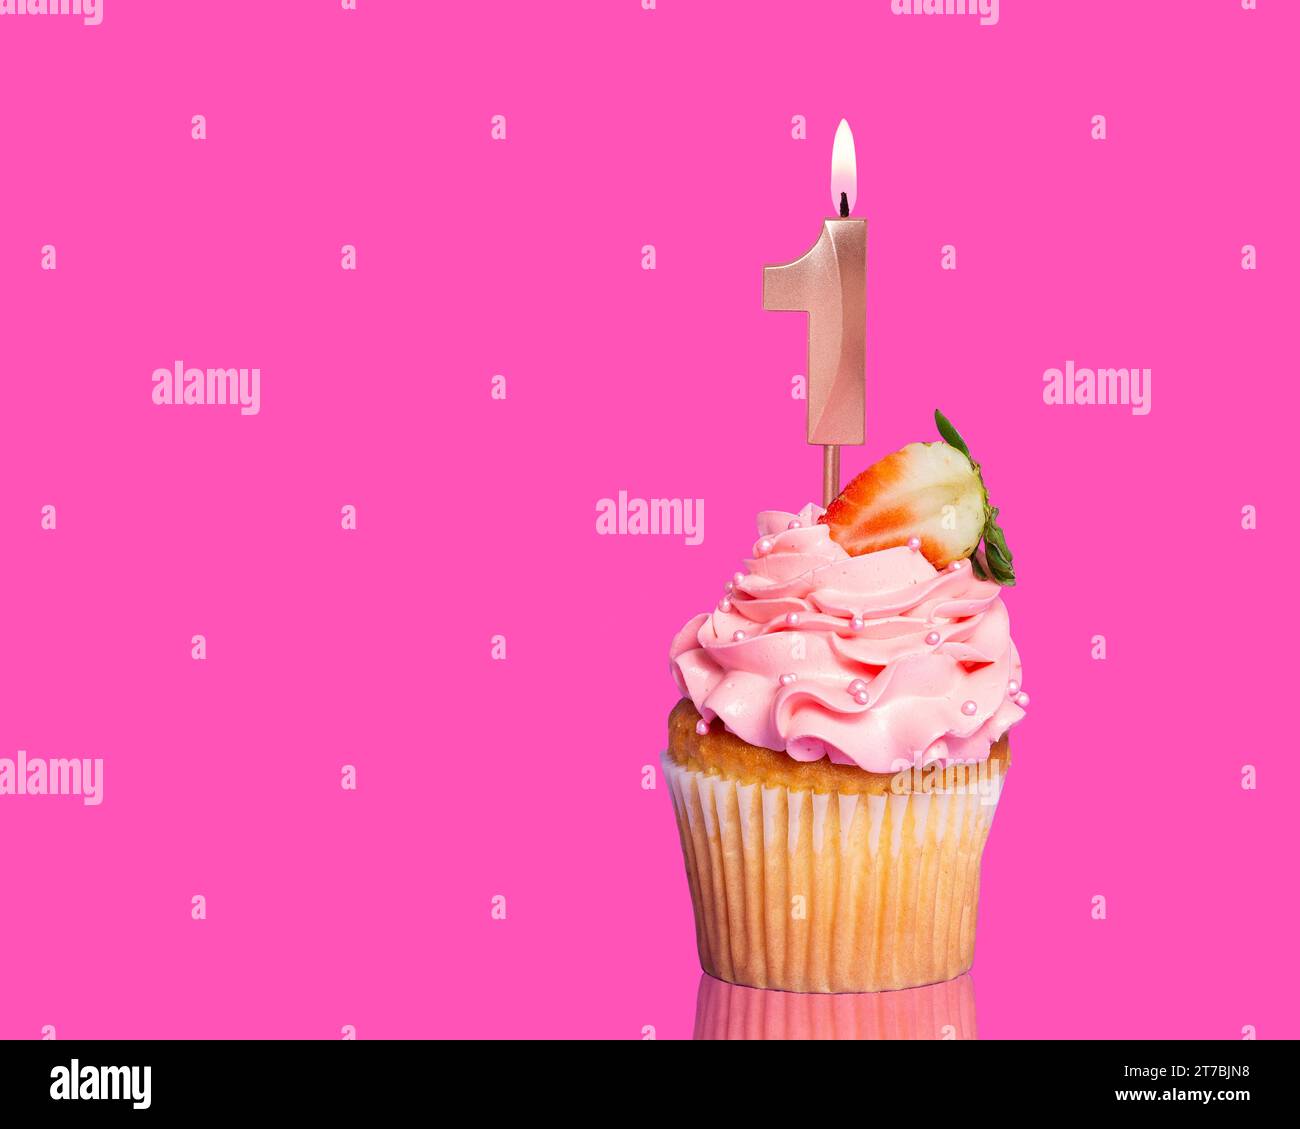 Birthday Cupcake With Candle Number 1 - On Hot Pink Background. Stock Photo